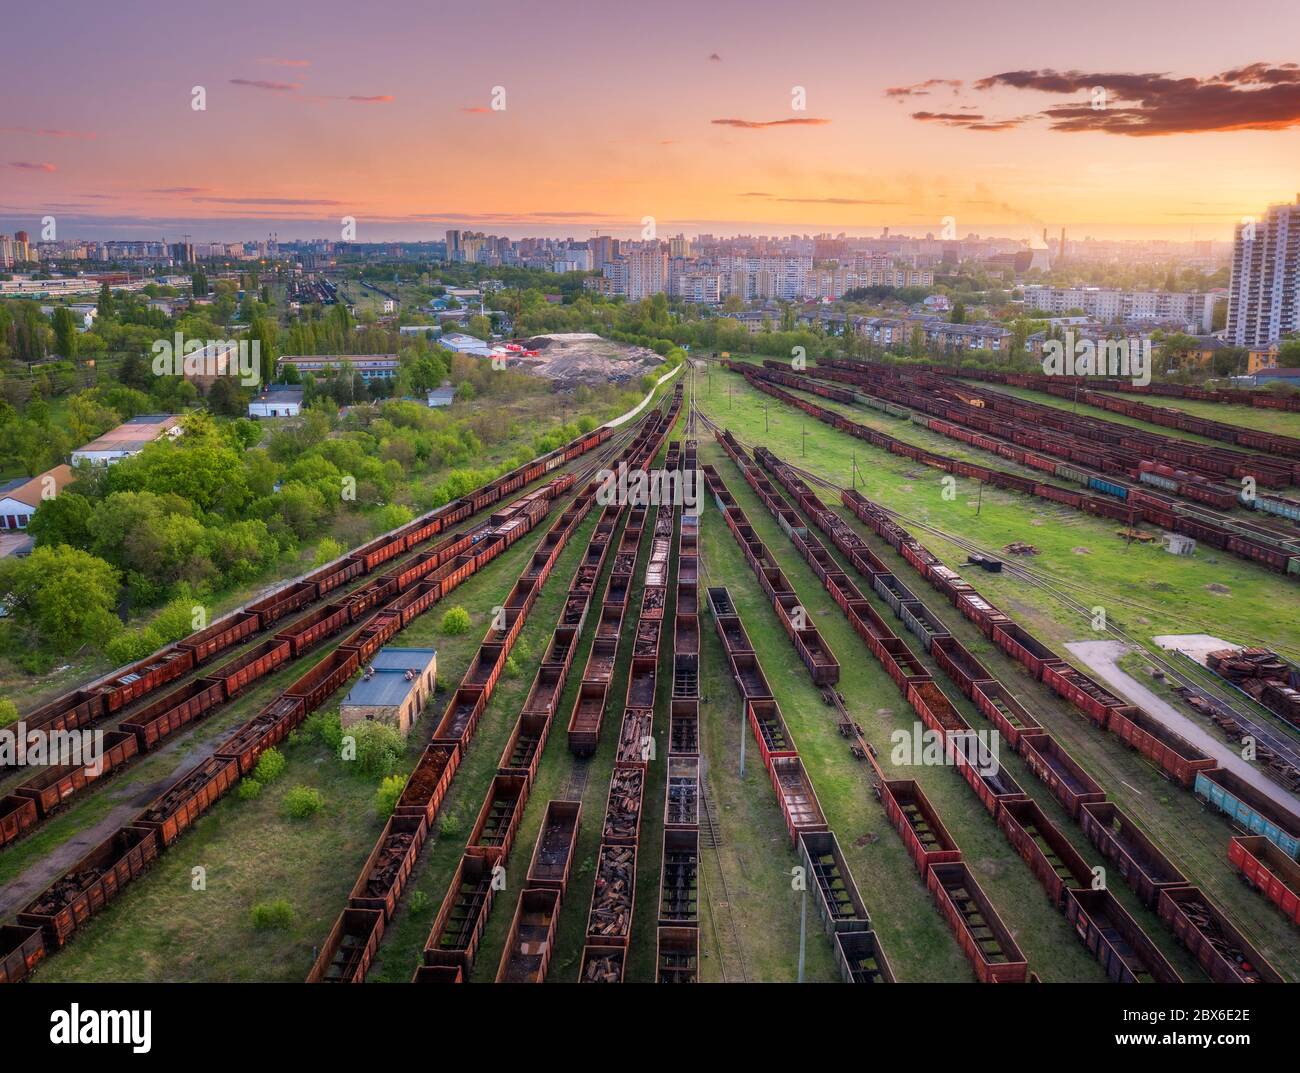 Aerial view of freight trains at sunset. Top view Stock Photo